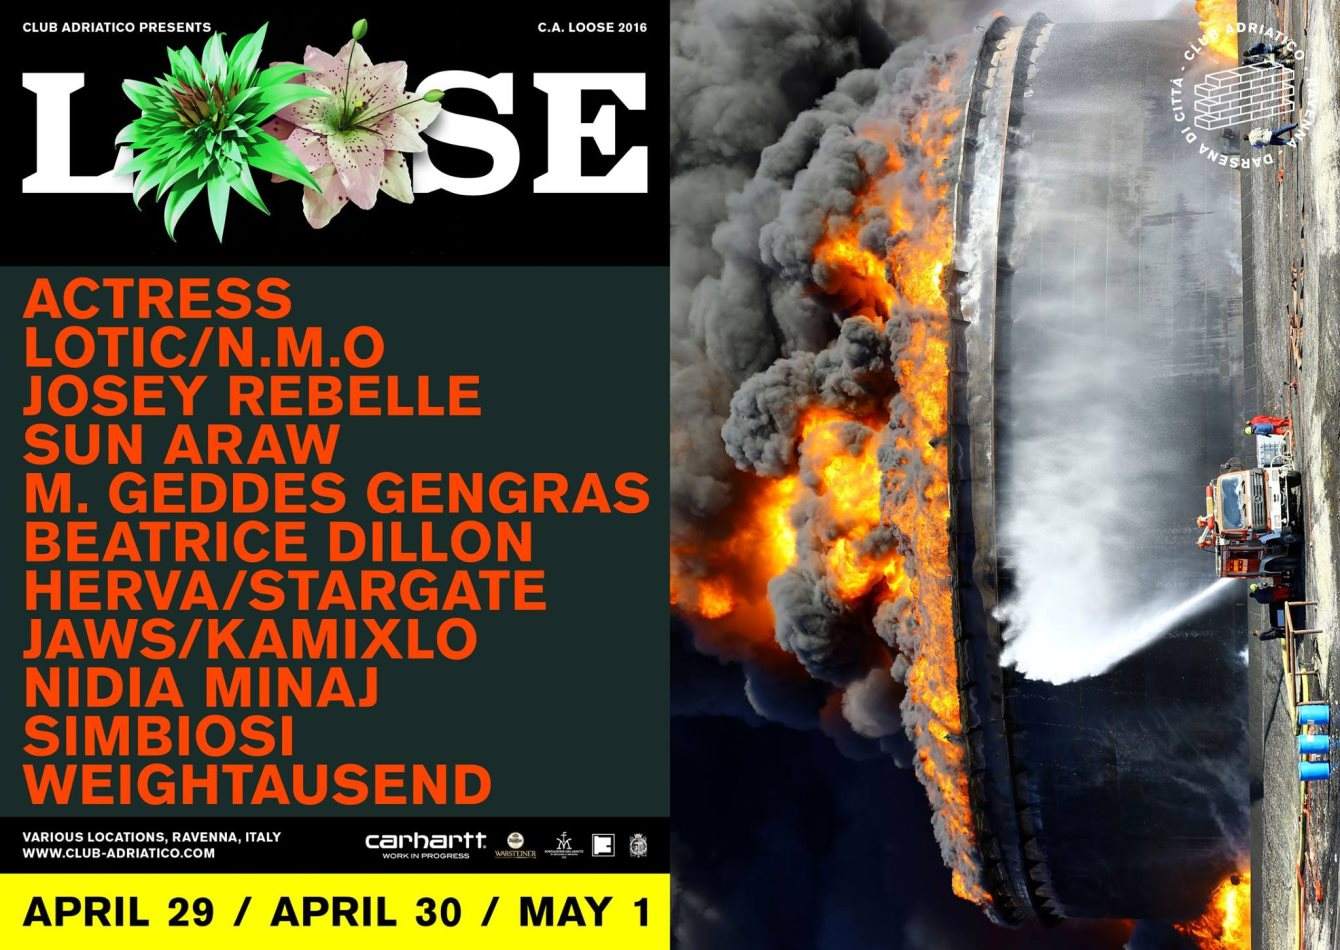 C.A. Loose 2016 - with Actress, Lotic, N.M.O., Josey Rebelle, Herva and More TBA - フライヤー表